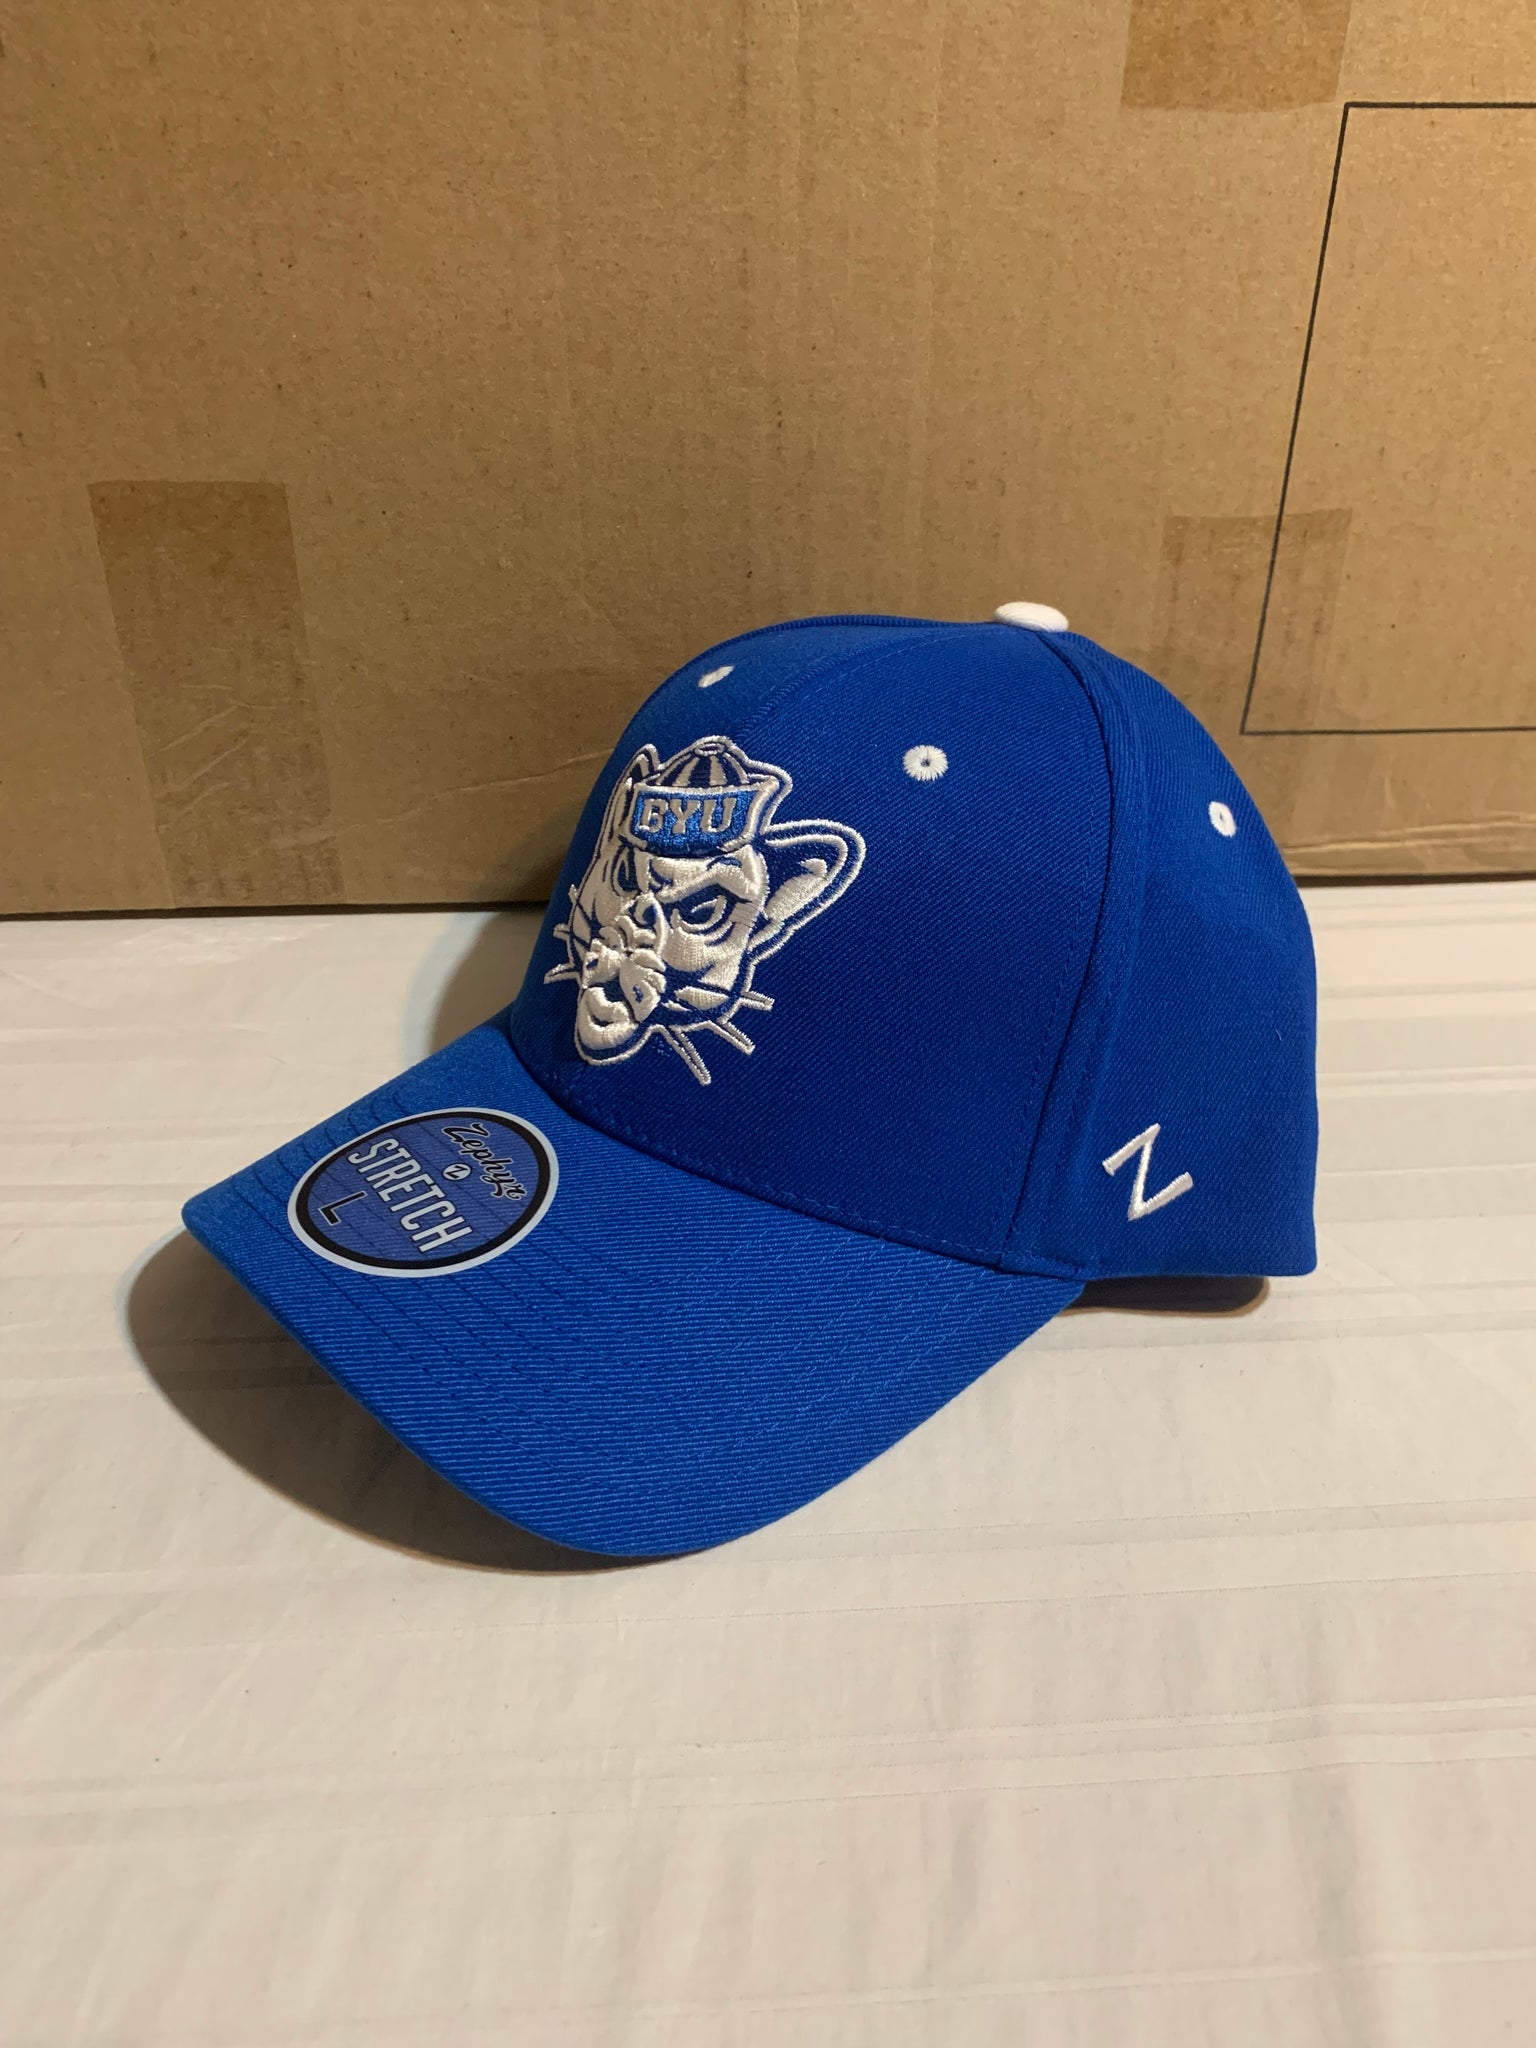 BYU Cougars Pet Baseball Hat – 3 Red Rovers